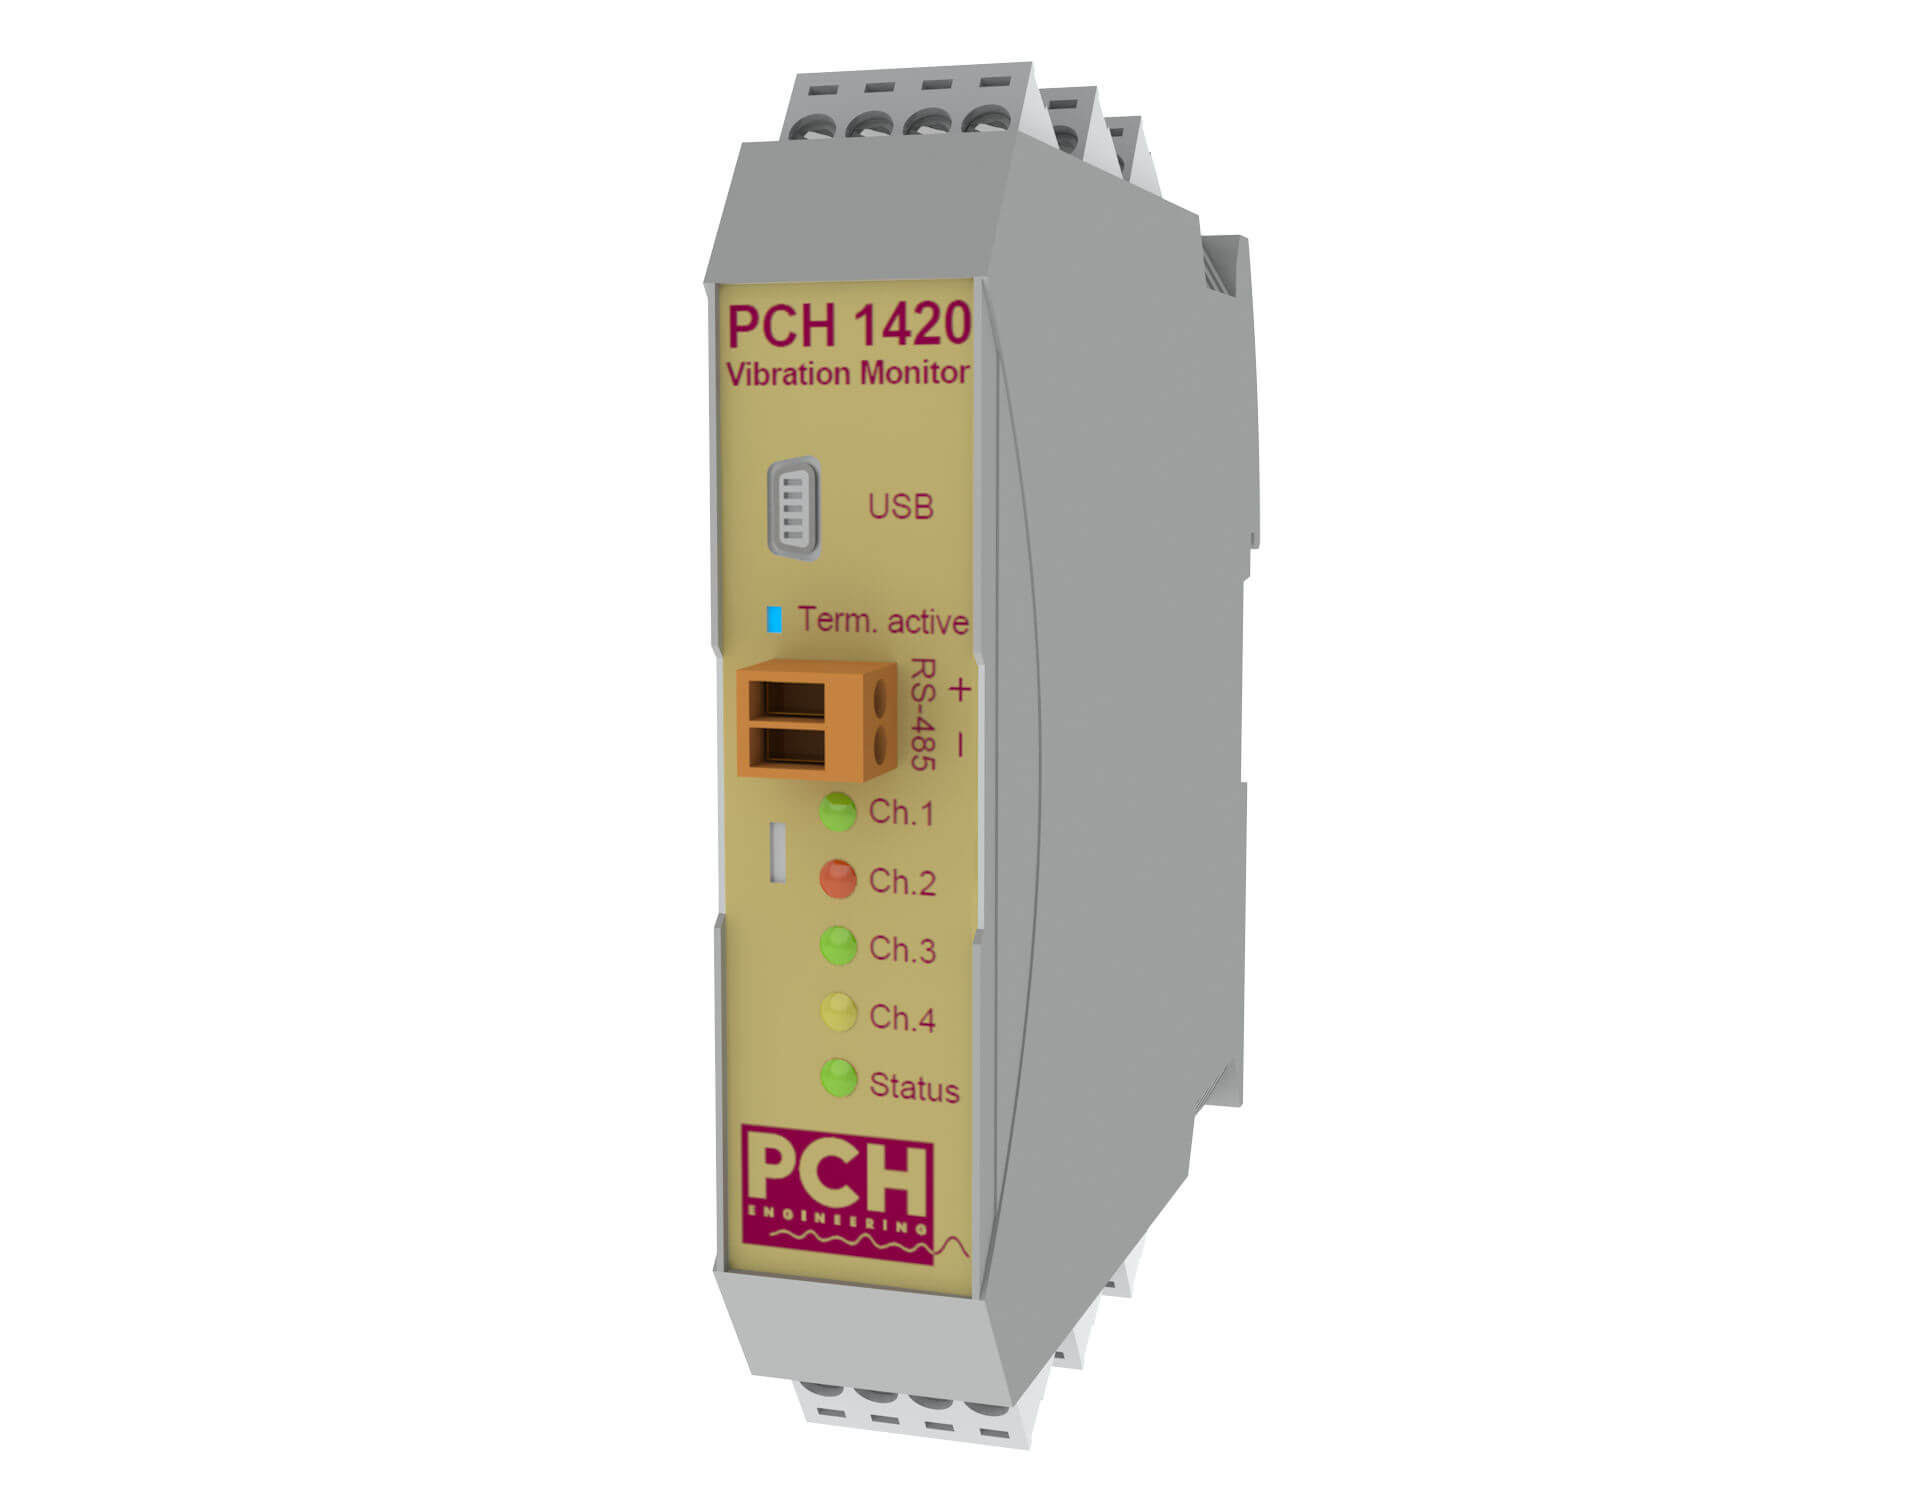 PCH 1420 vibration monitor product page